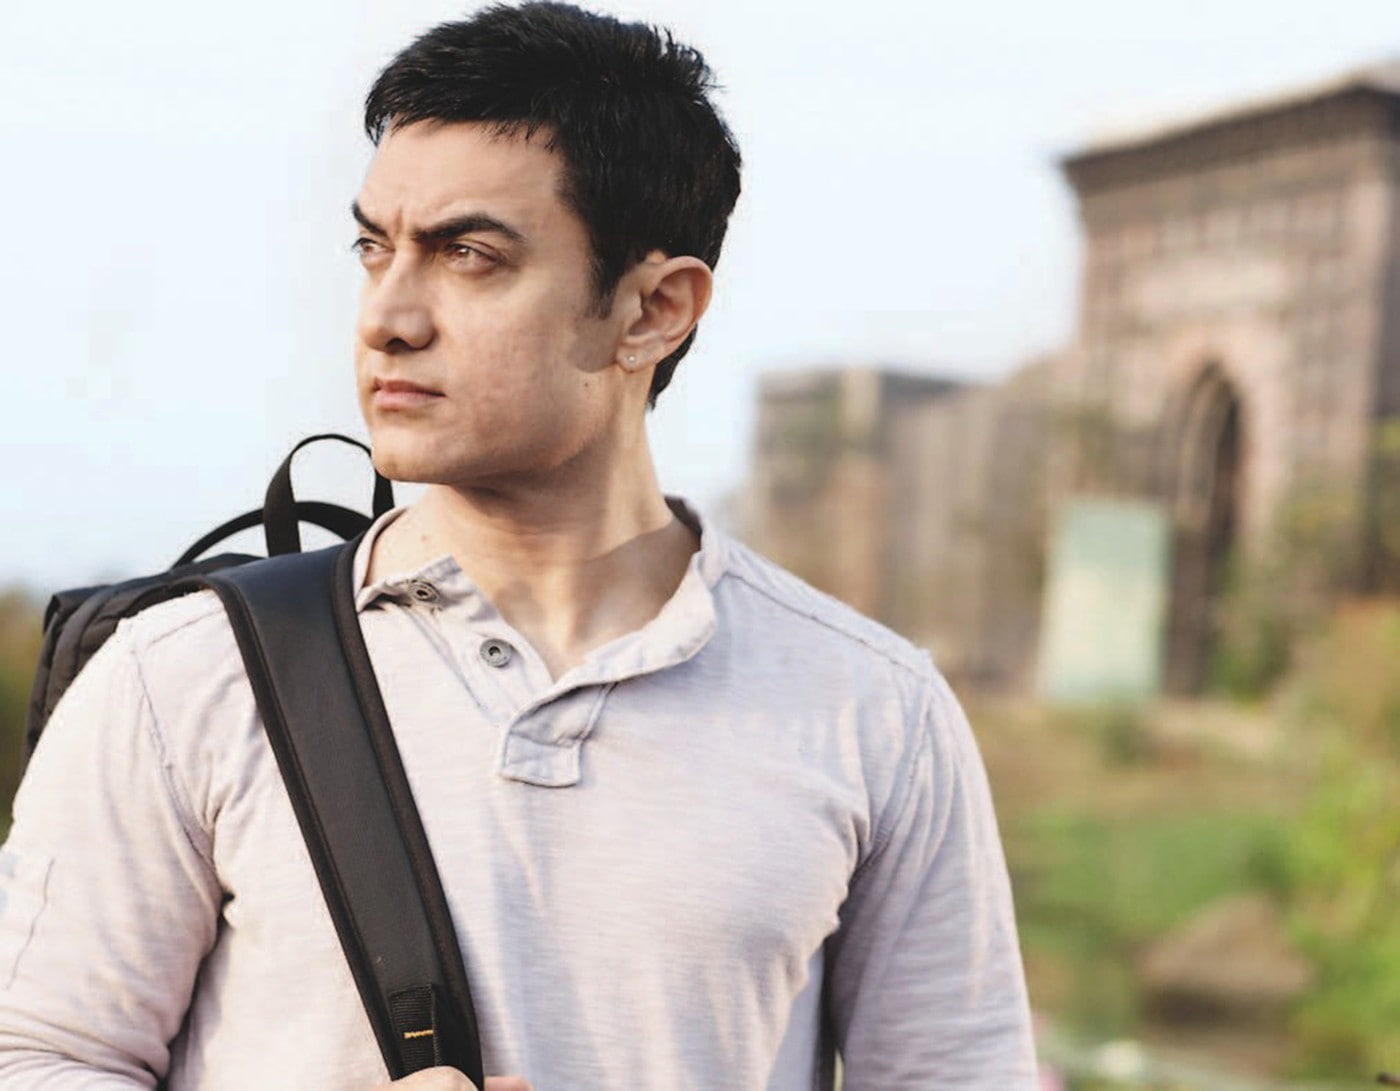 Aamir Khan, Bollywood actors, men, young adult, one person